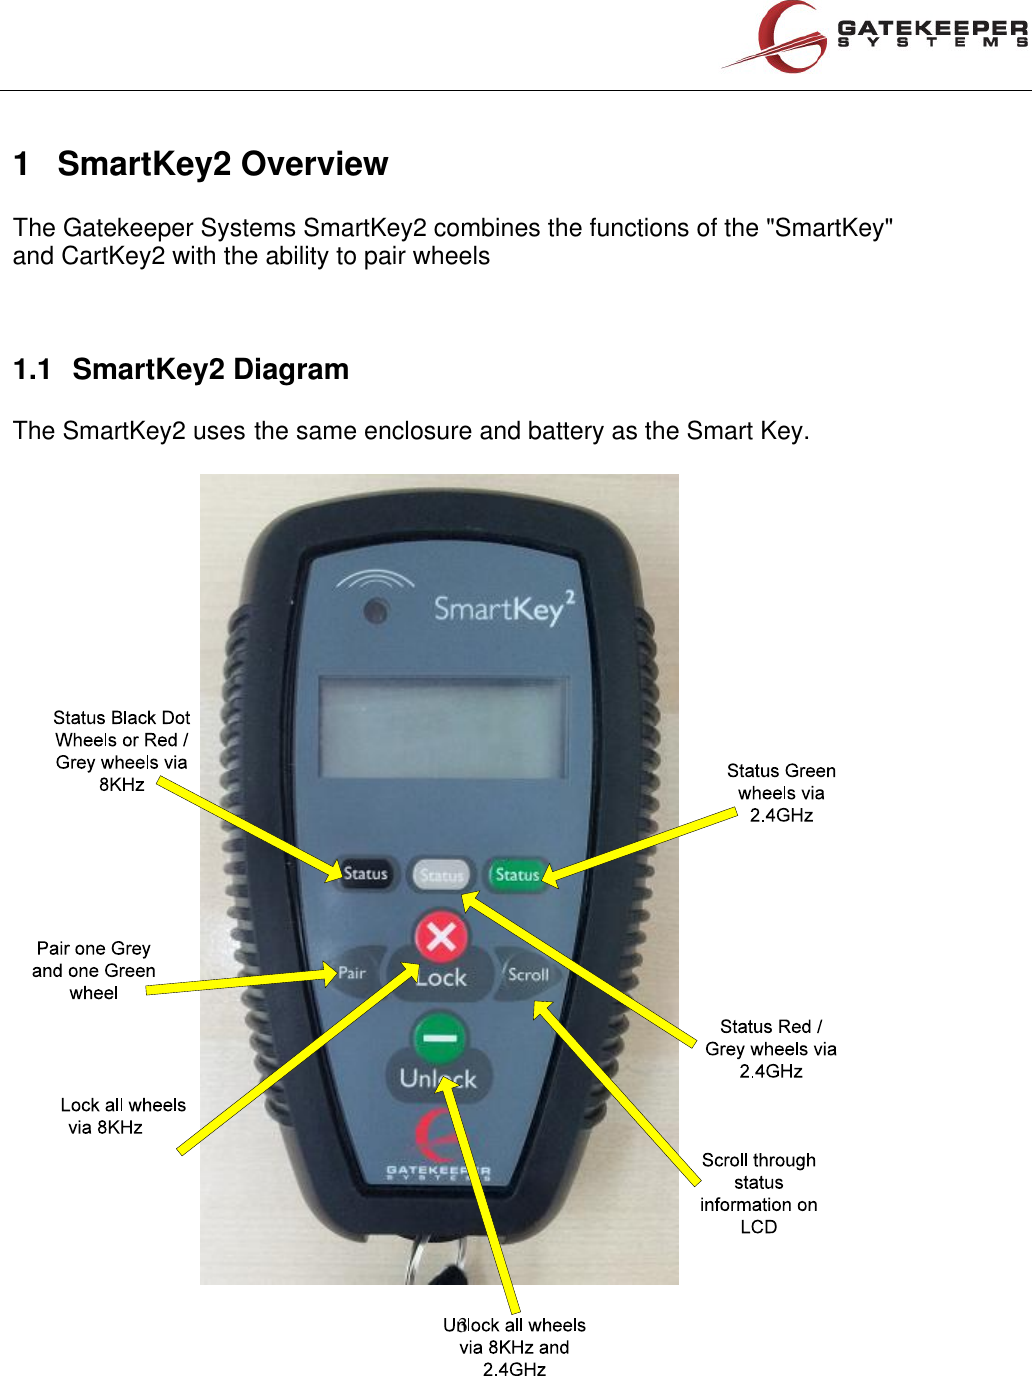 The SmartKey2 usesand CartKey2 with the ability to pair wheelsSmartKey2 DiagramSmartKey2 Overview   3           1                             1.1     the same enclosure and battery as the Smart Key.    The Gatekeeper Systems SmartKey2 combines the functions of the &quot;SmartKey&quot;